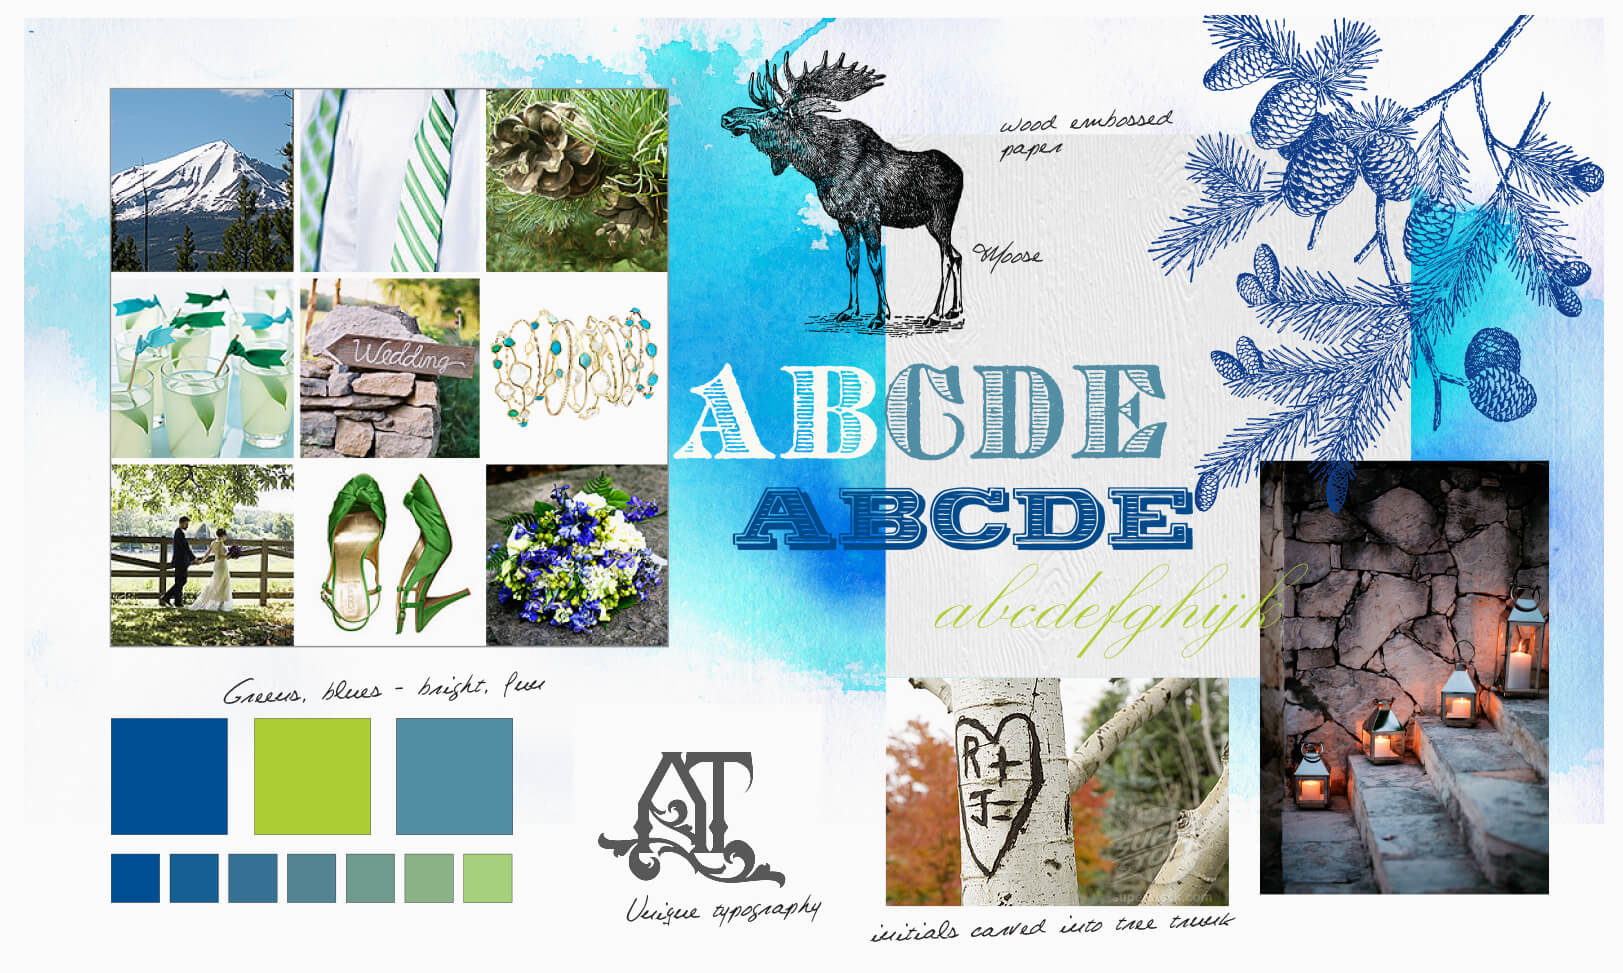 Vintage typography, pinecones and moose inspiration